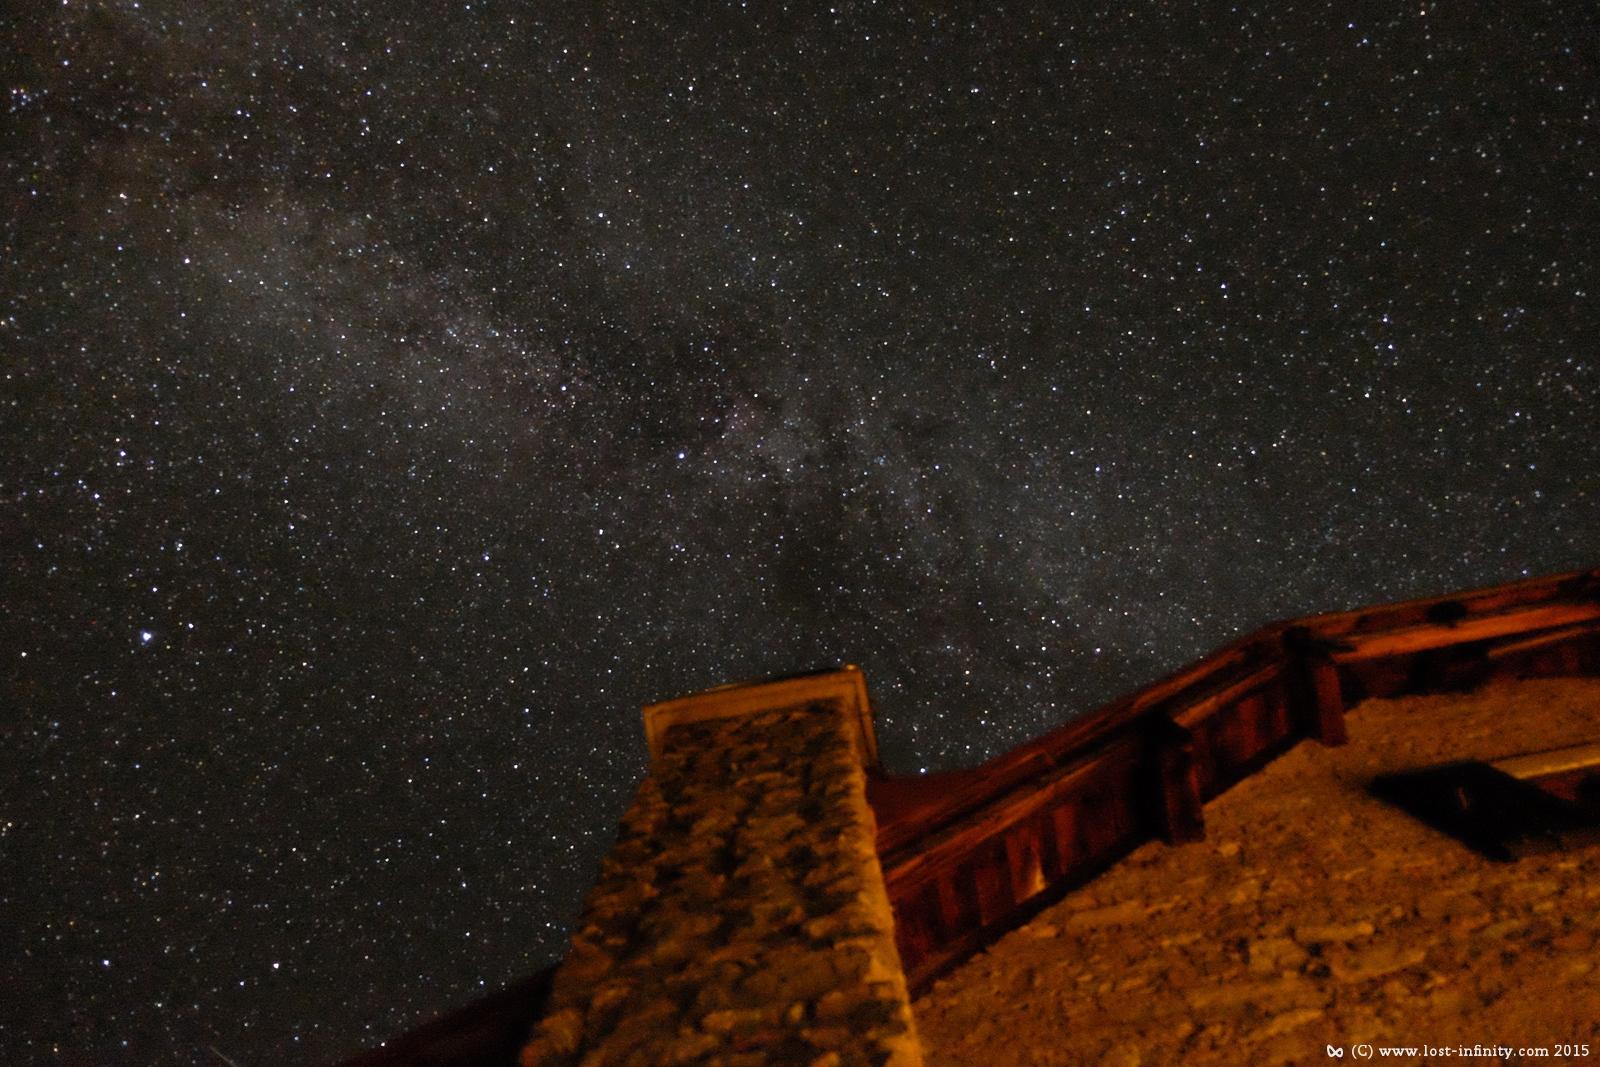 The old Waltenberger Haus and the Milkyway